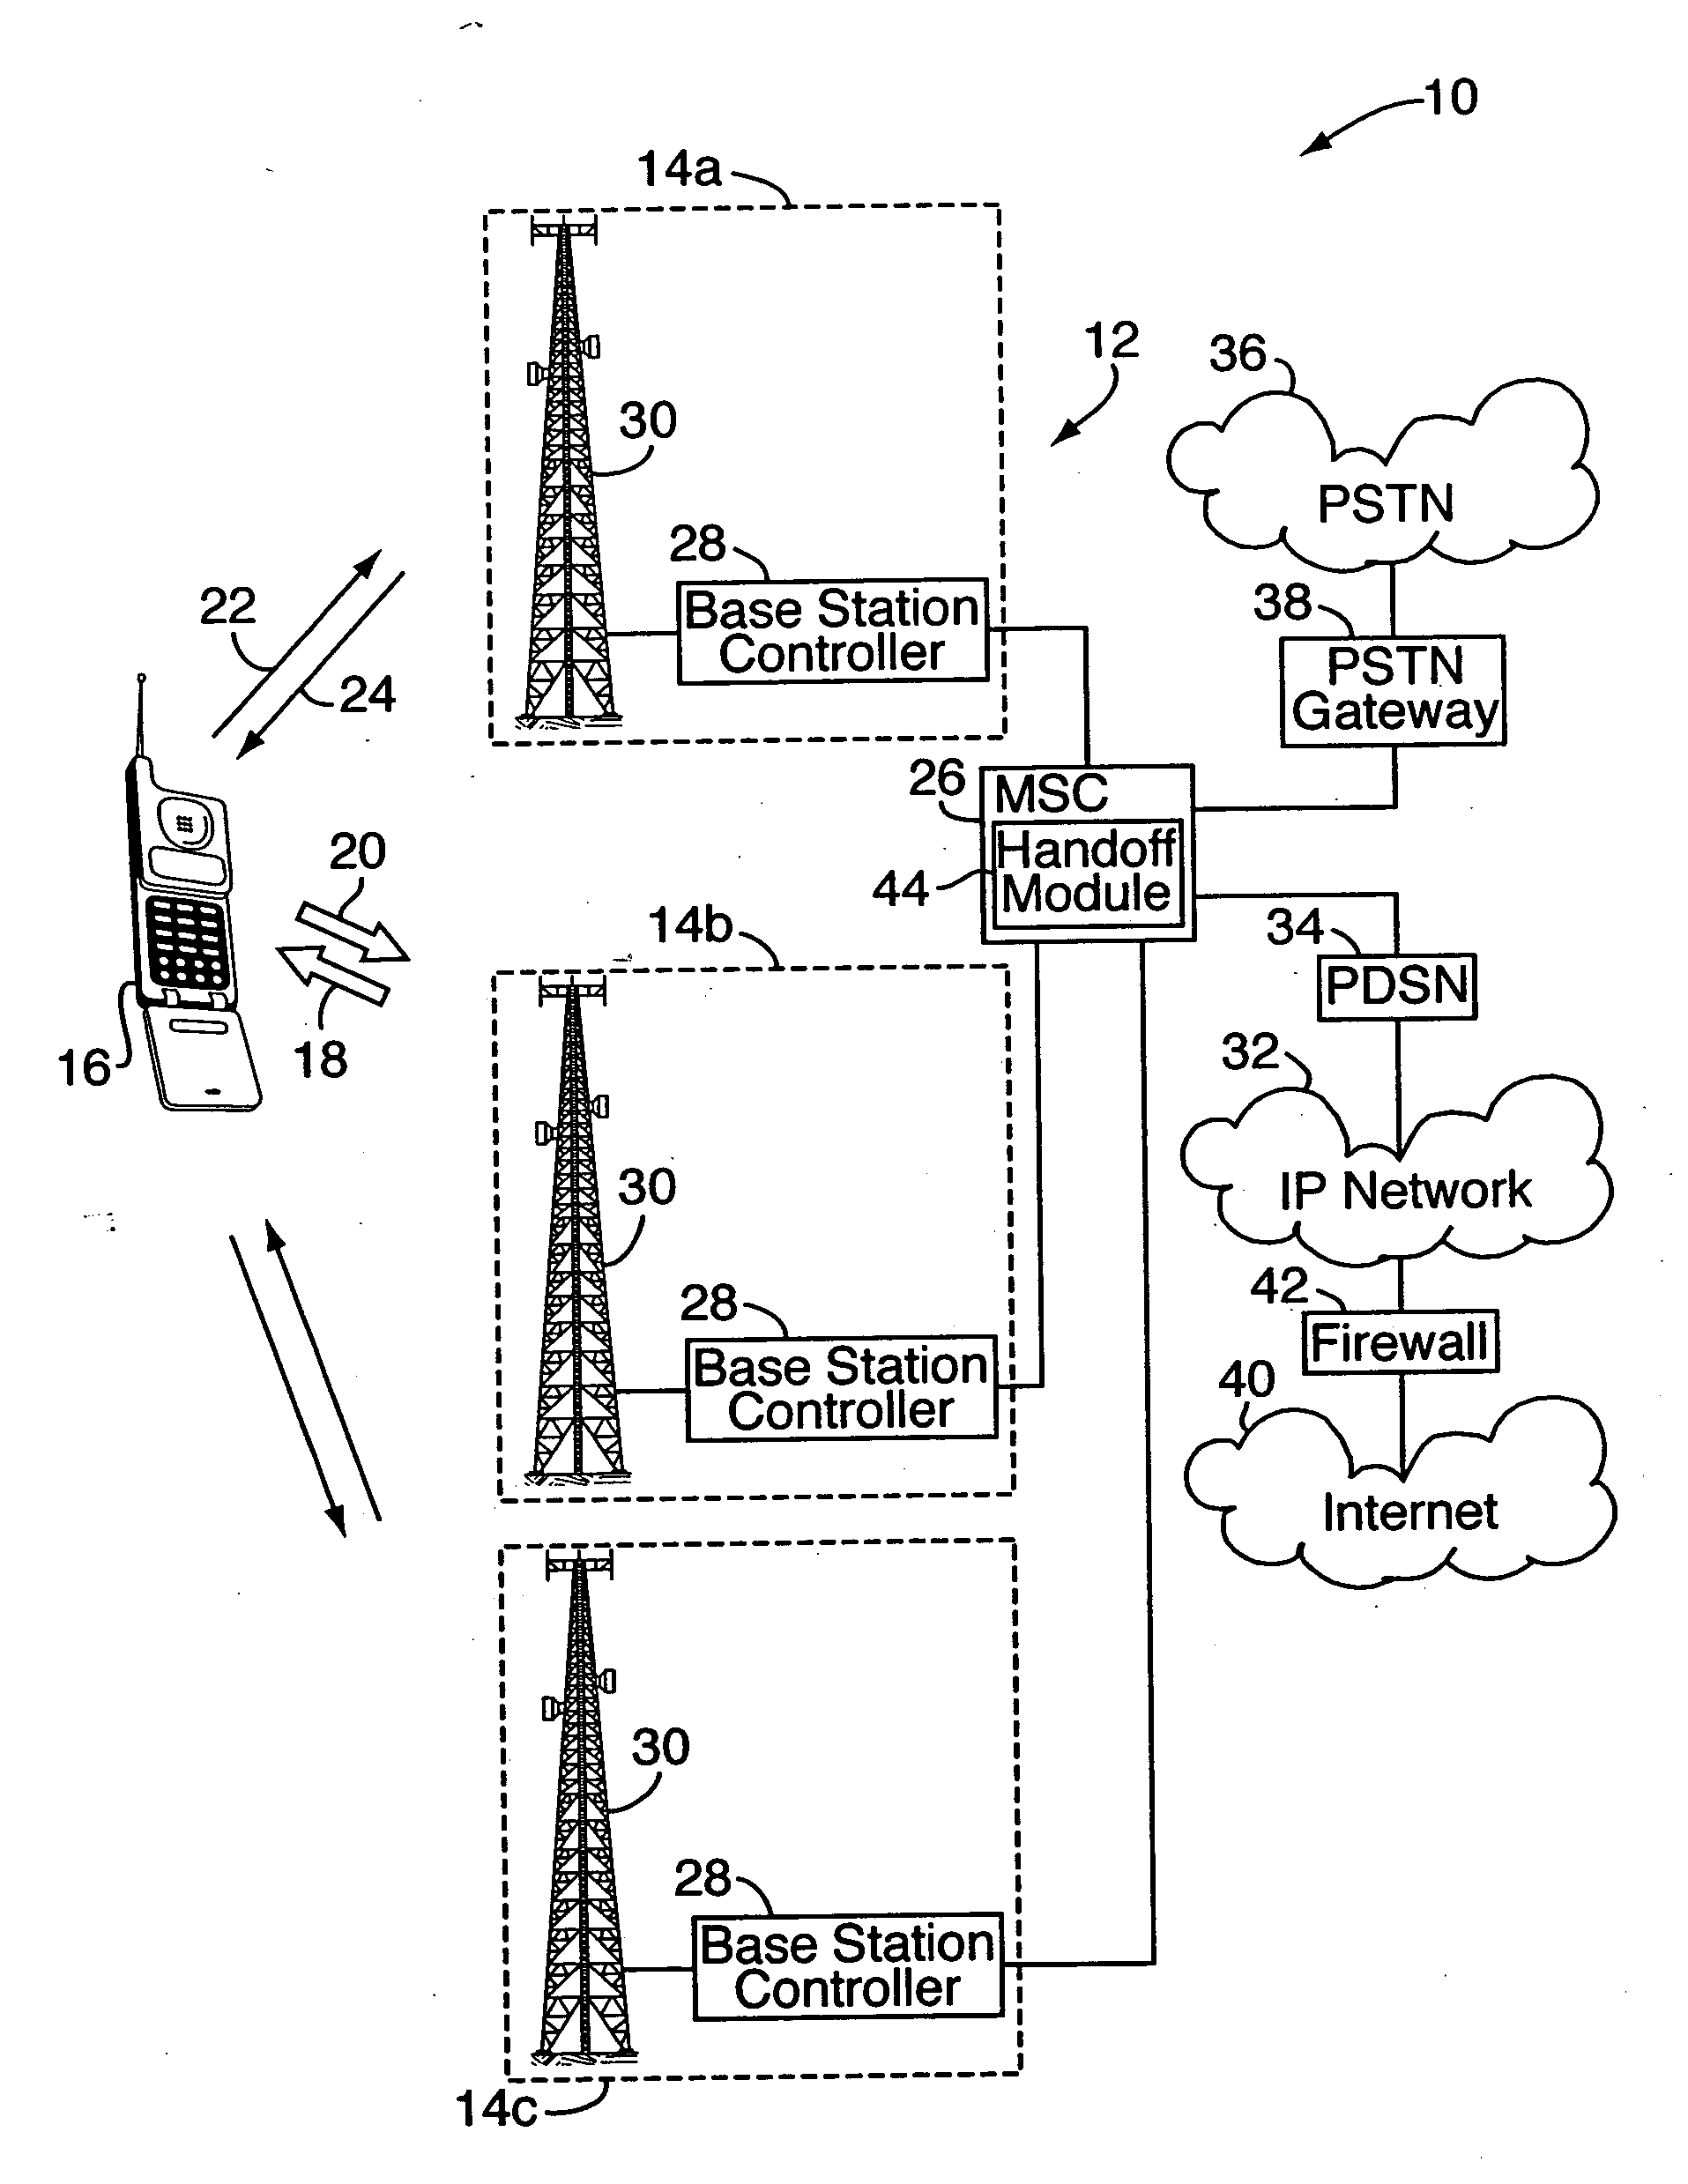 Method for adjusting forward link power control parameters based on forward link quality feedback in wireless network